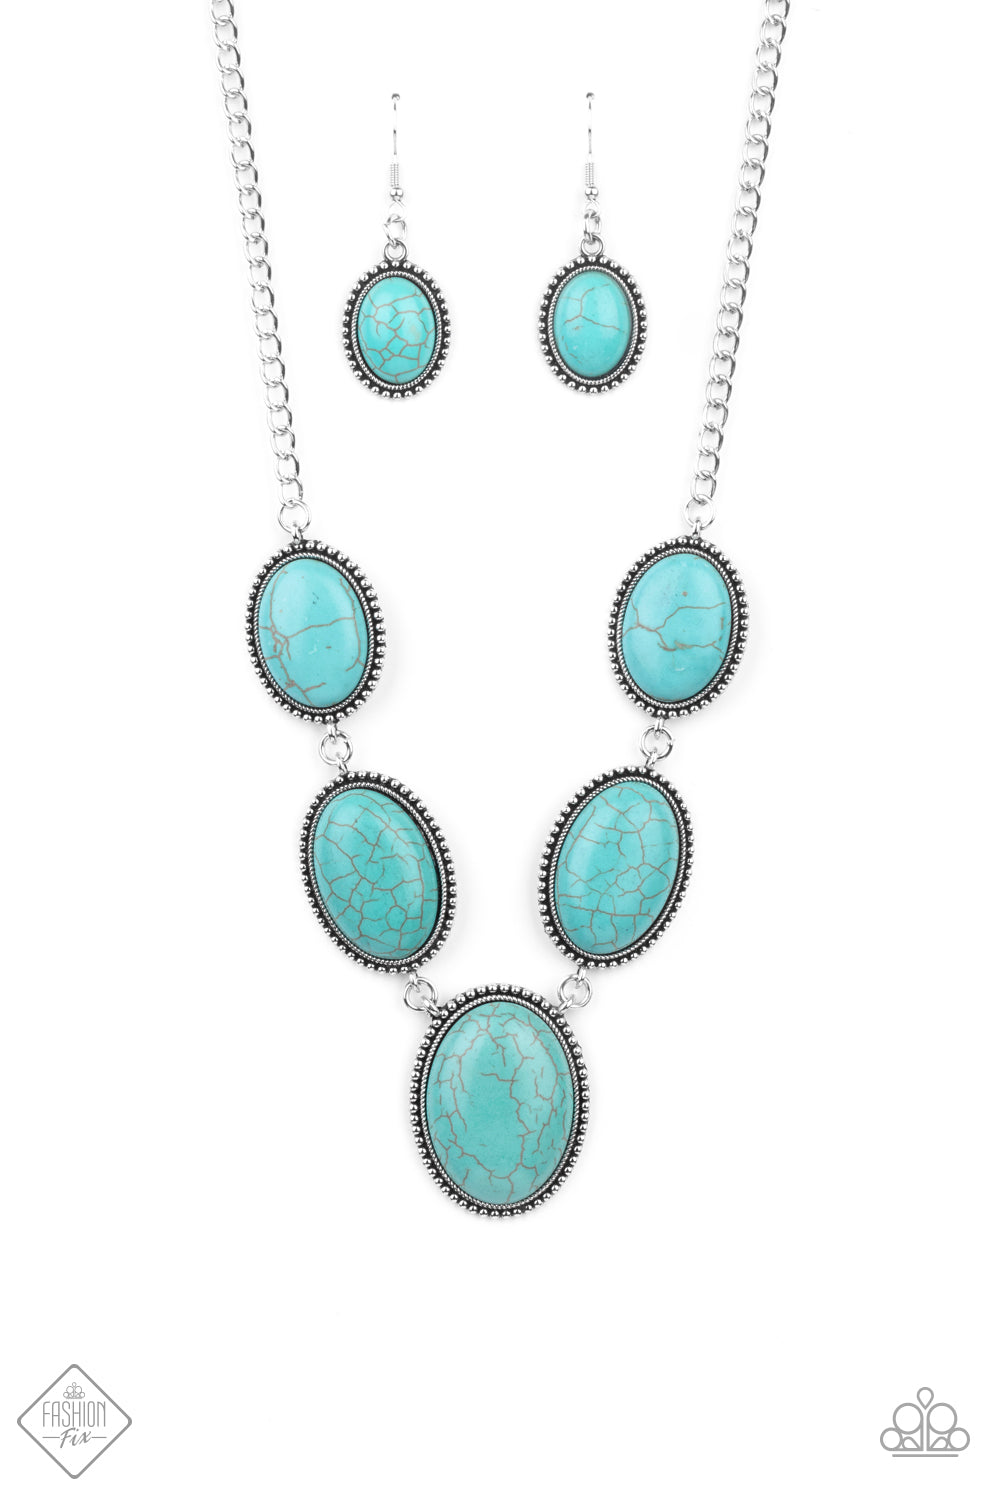 Paparazzi River Valley Radiance Blue Stone Short Necklace - Fashion Fix Sunset Sightings December 2020